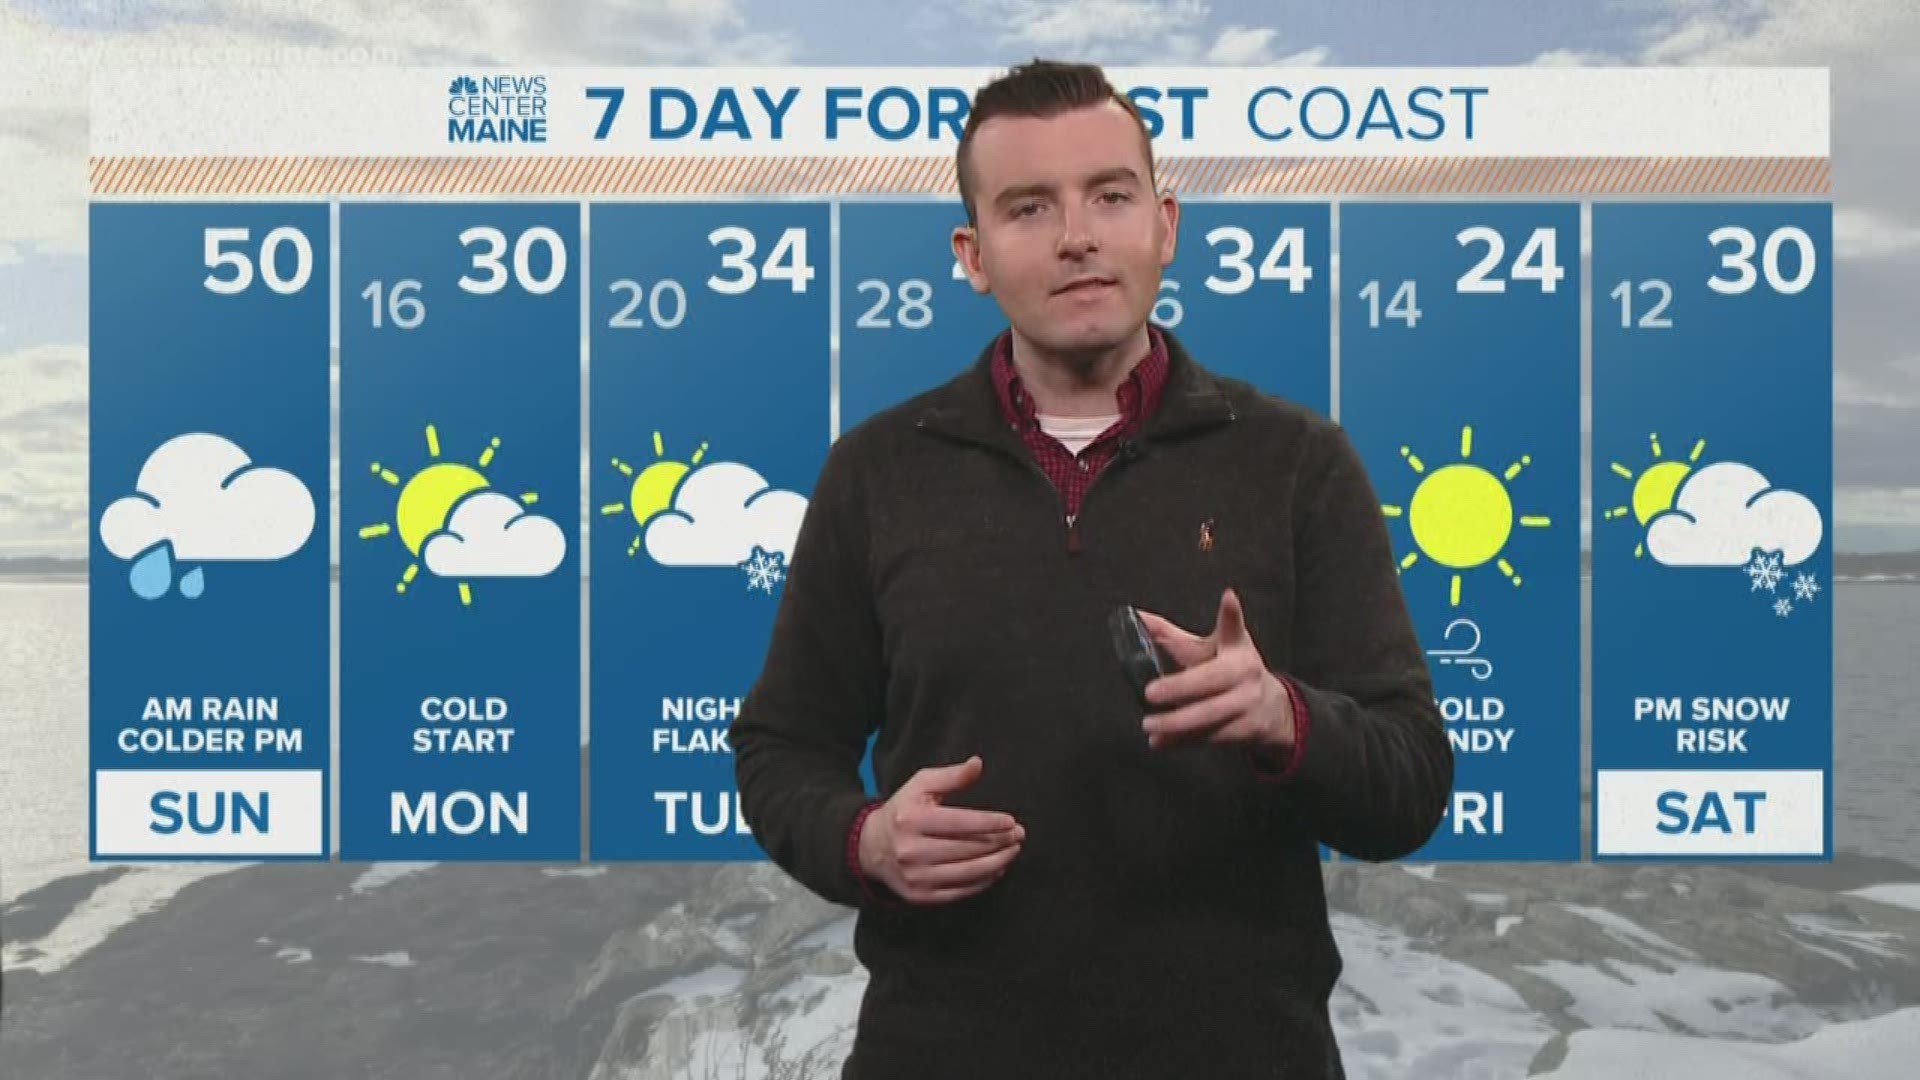 NEWS CENTER Maine Weather Video Forecast. Updated on 1/12/20 at 8 am.